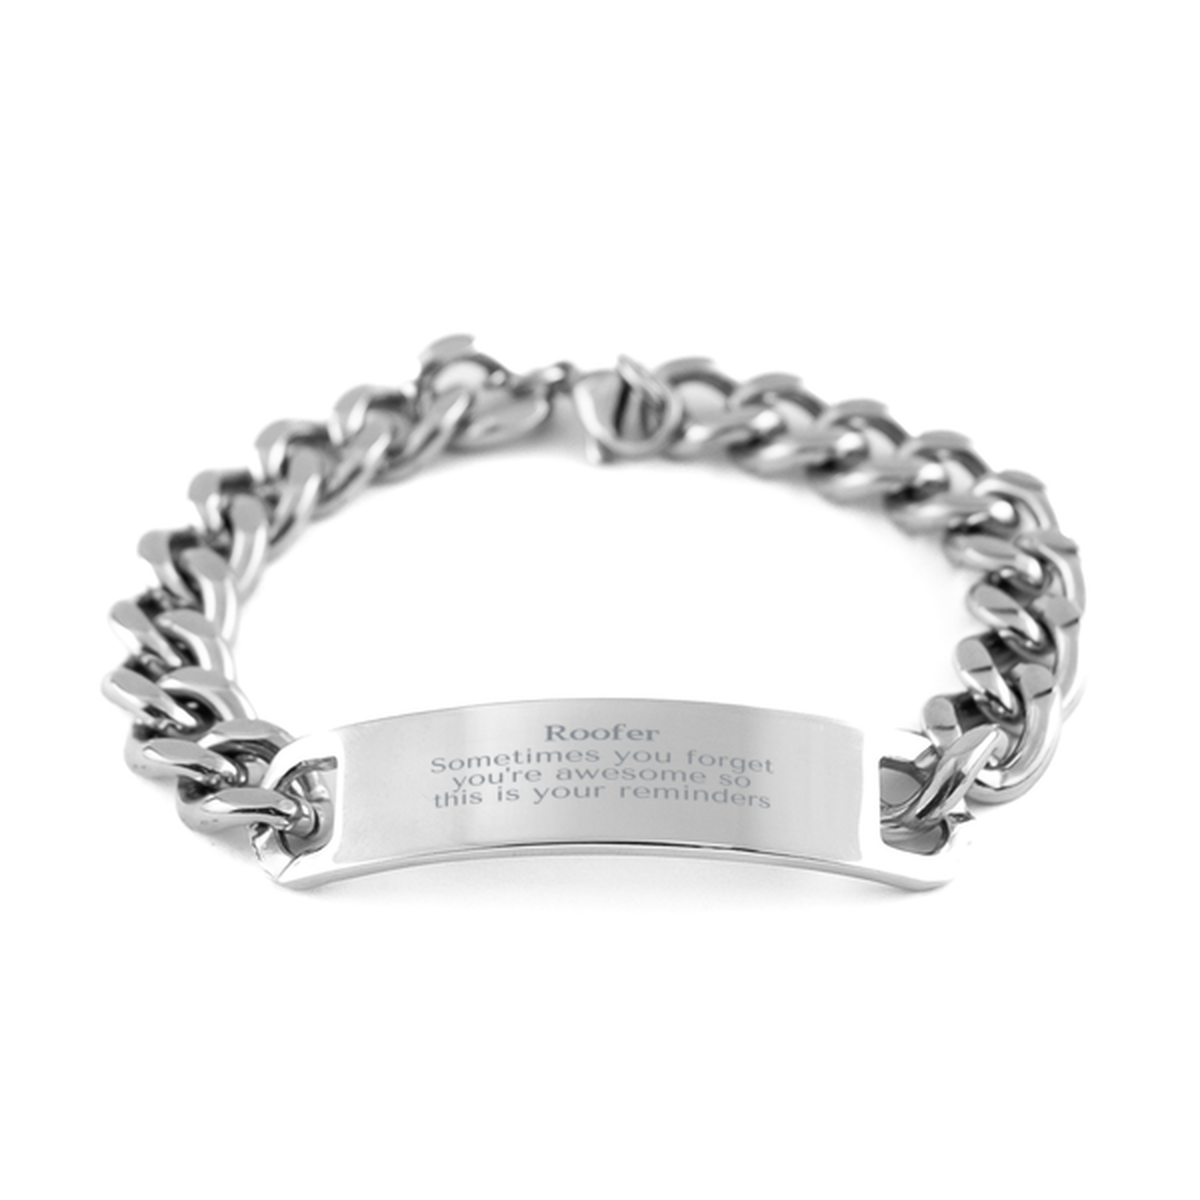 Sentimental Roofer Cuban Chain Stainless Steel Bracelet, Roofer Sometimes you forget you're awesome so this is your reminders, Graduation Christmas Birthday Gifts for Roofer, Men, Women, Coworkers